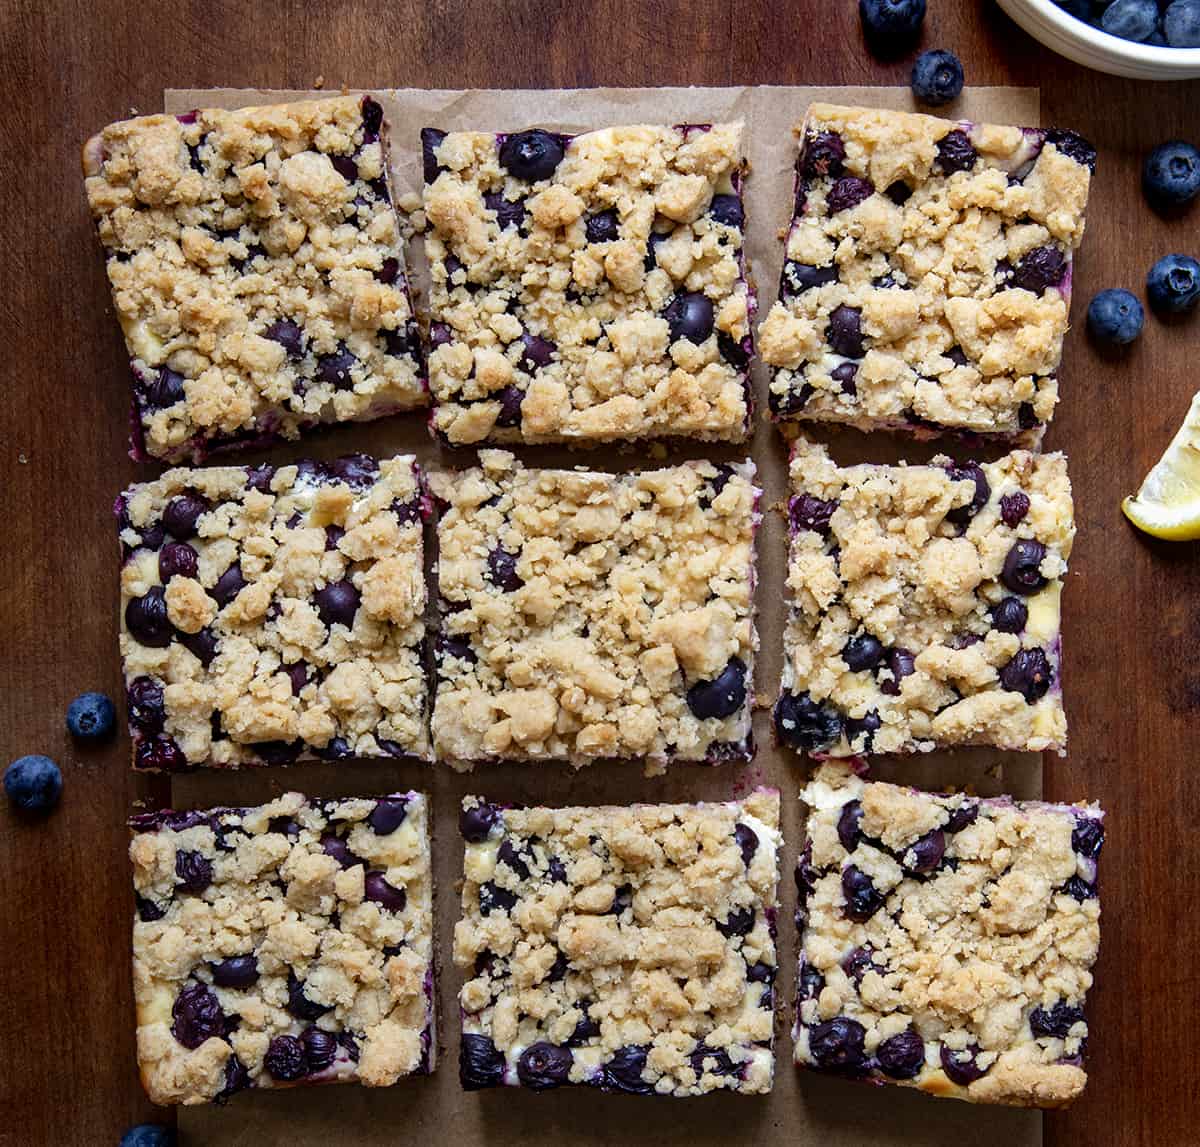 Blueberry Lemon Cheesecake Bars on a wooden table cut into pieces with blueberries and fresh lemon.